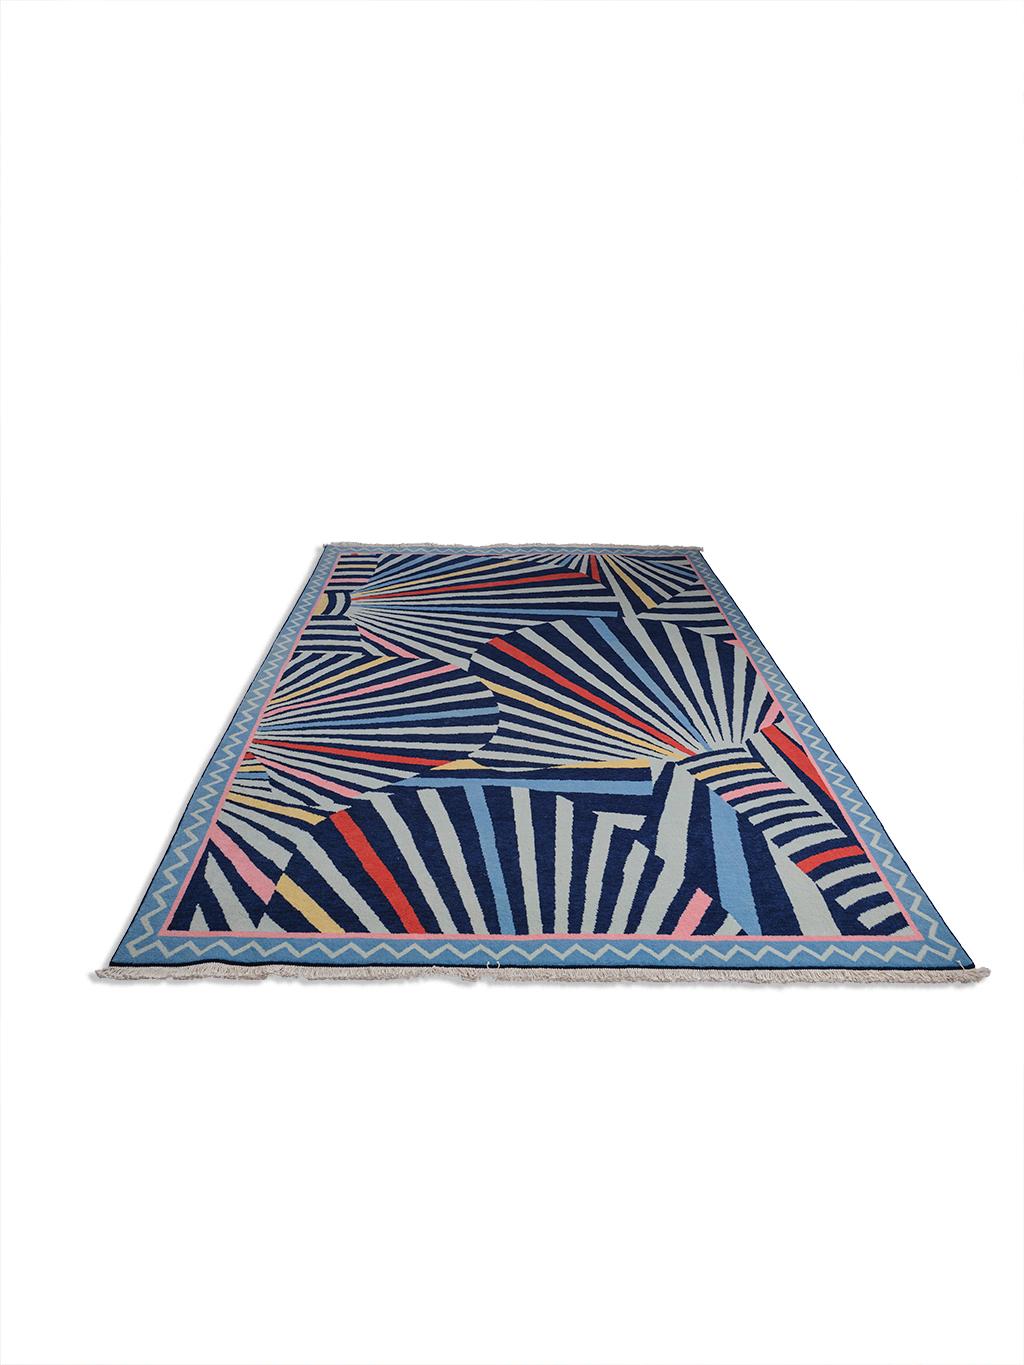 Abou the rug:
This hand-knotted rug has 160,000 knots per square meter, a double knot construction, and is made of 100% New Zealand wool for the face yarn and 100% Egyptian cotton for the warp and weft. The pile height is about 8mm and it weighs